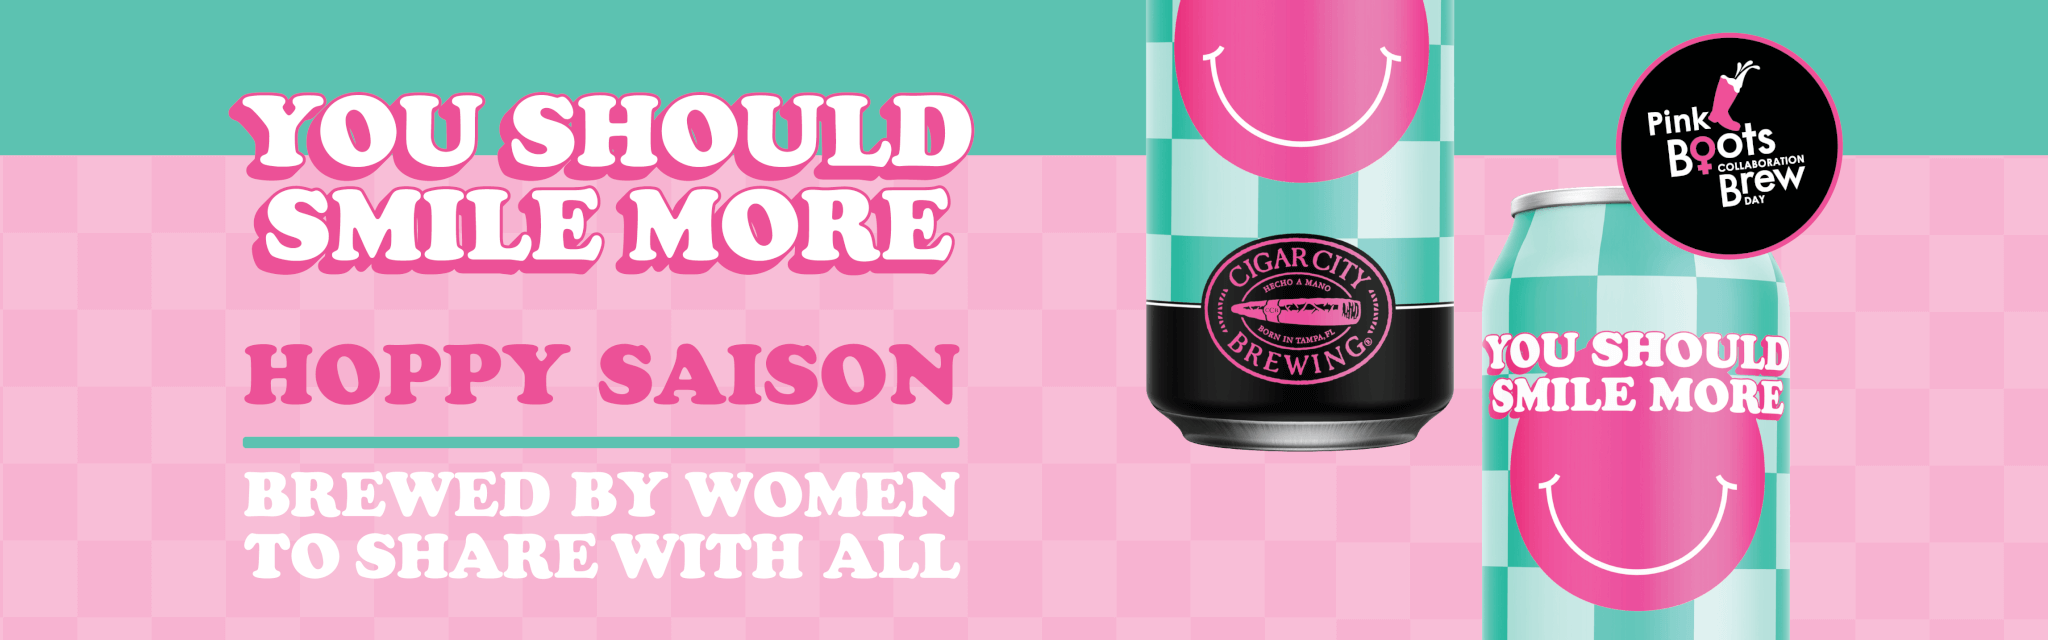 Cigar City Brewing and the Pink Boots Society Florida Chapter present You Should Smile More Hoppy Saison, brewed by women to share with all.